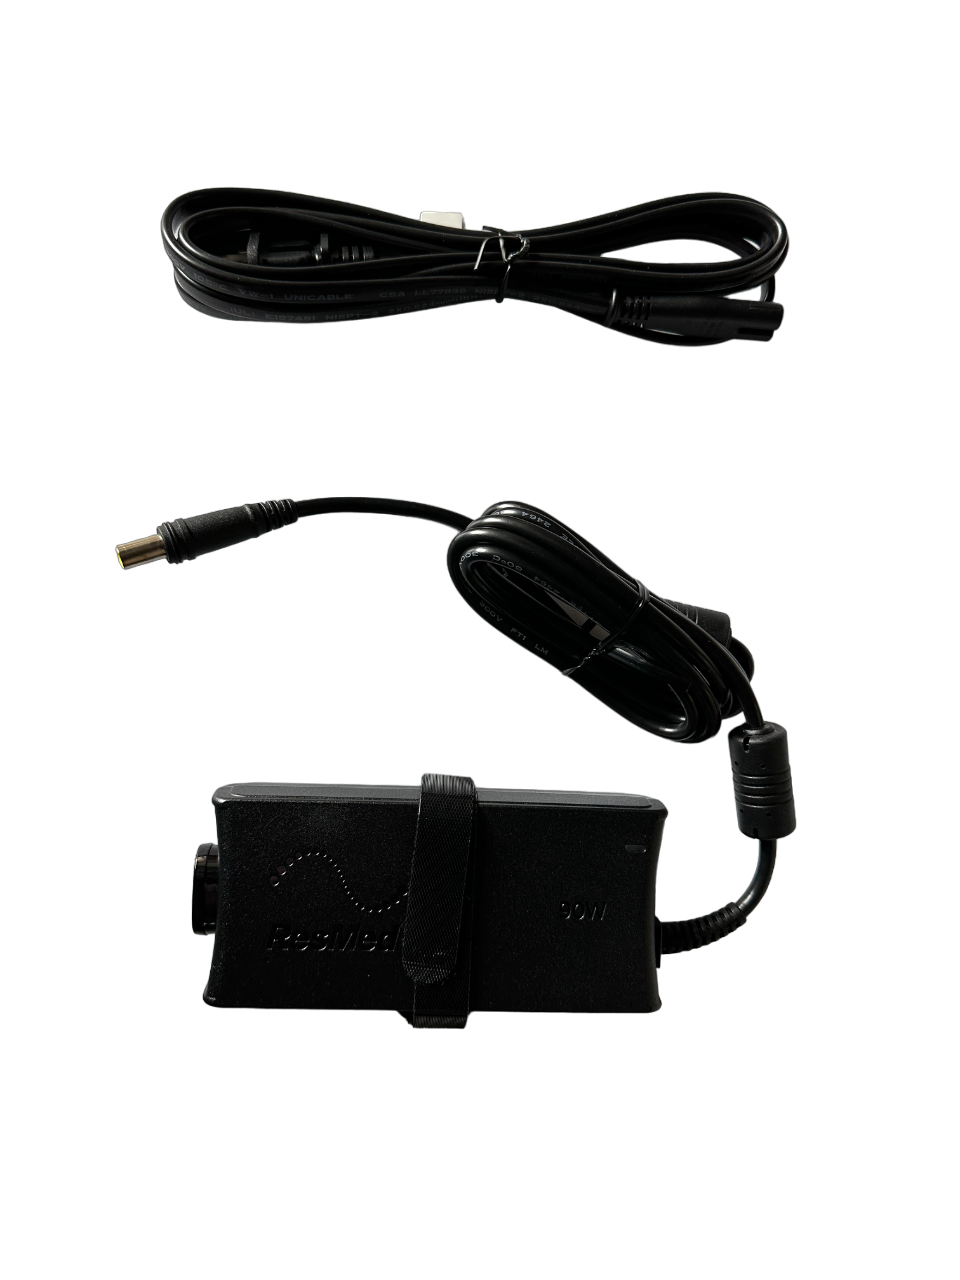 ResMed AC Power Cord for AirSense 10 and AirCurve 10 Machines - Refurbished